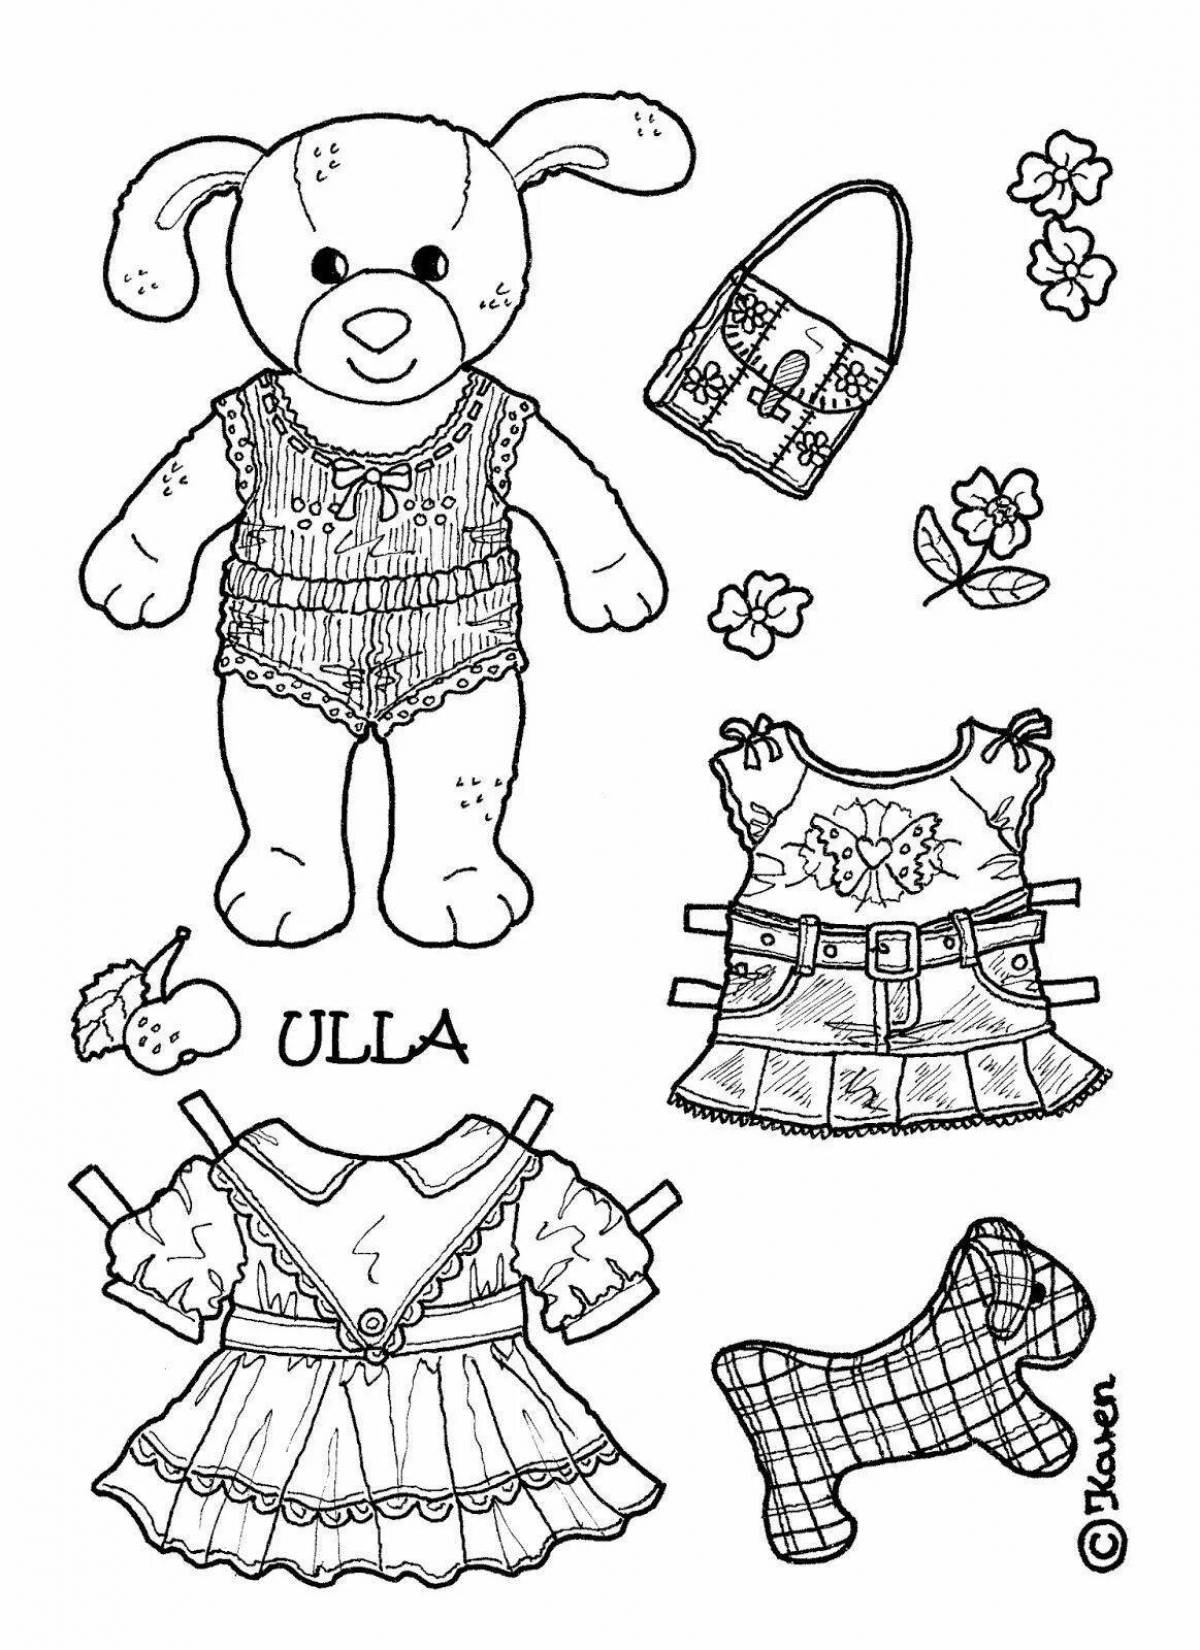 Fancy dress-up animal coloring pages